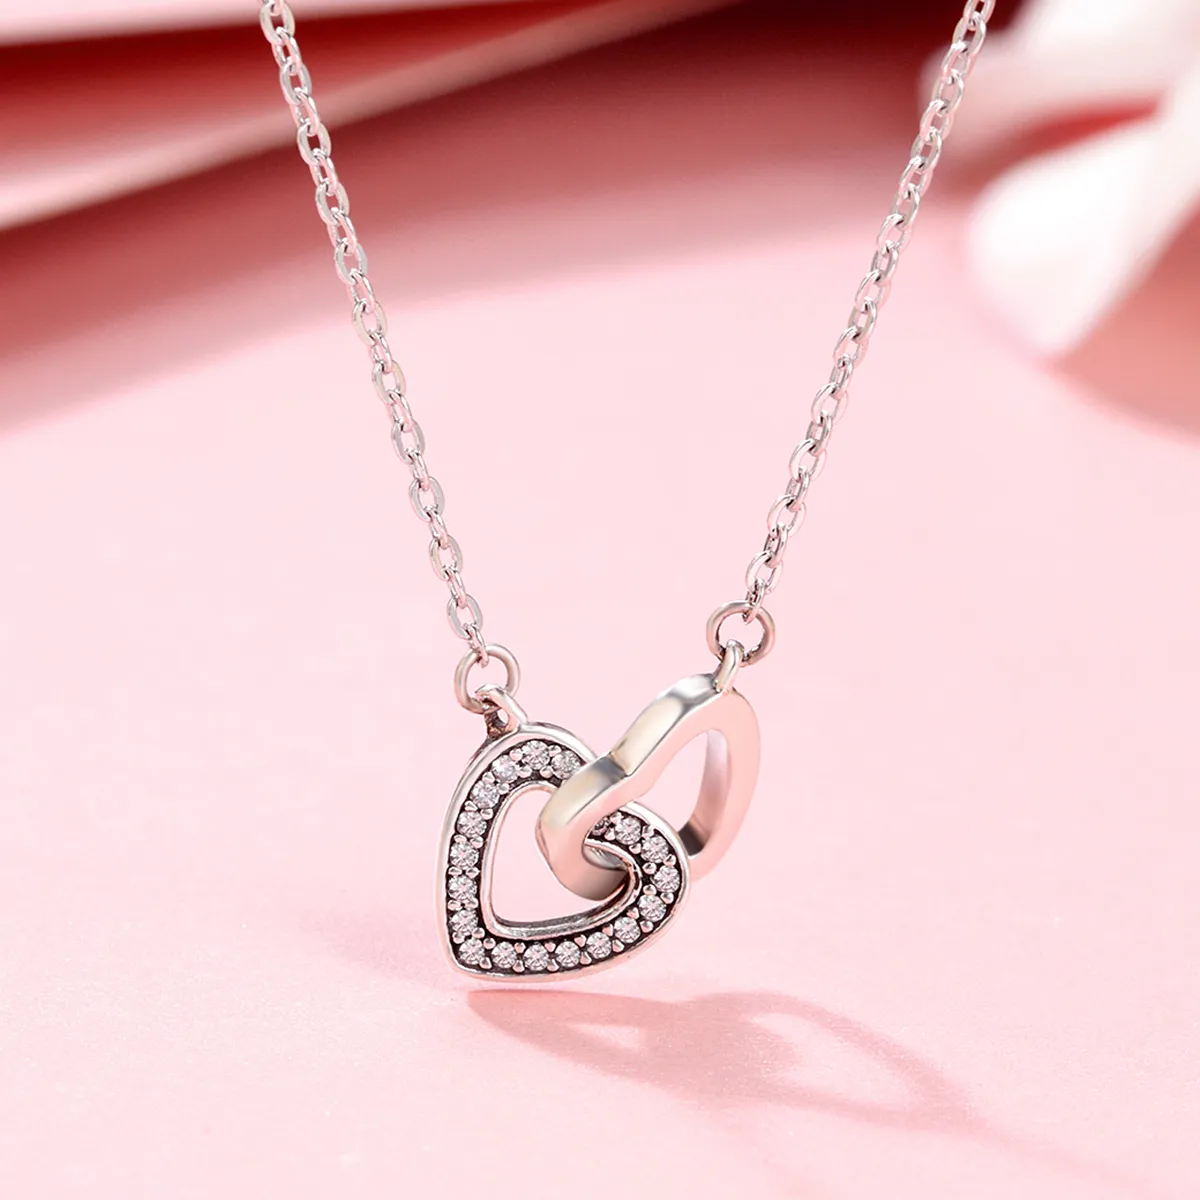 Pandora Style Silver Heart and Soul Necklace - SCN181